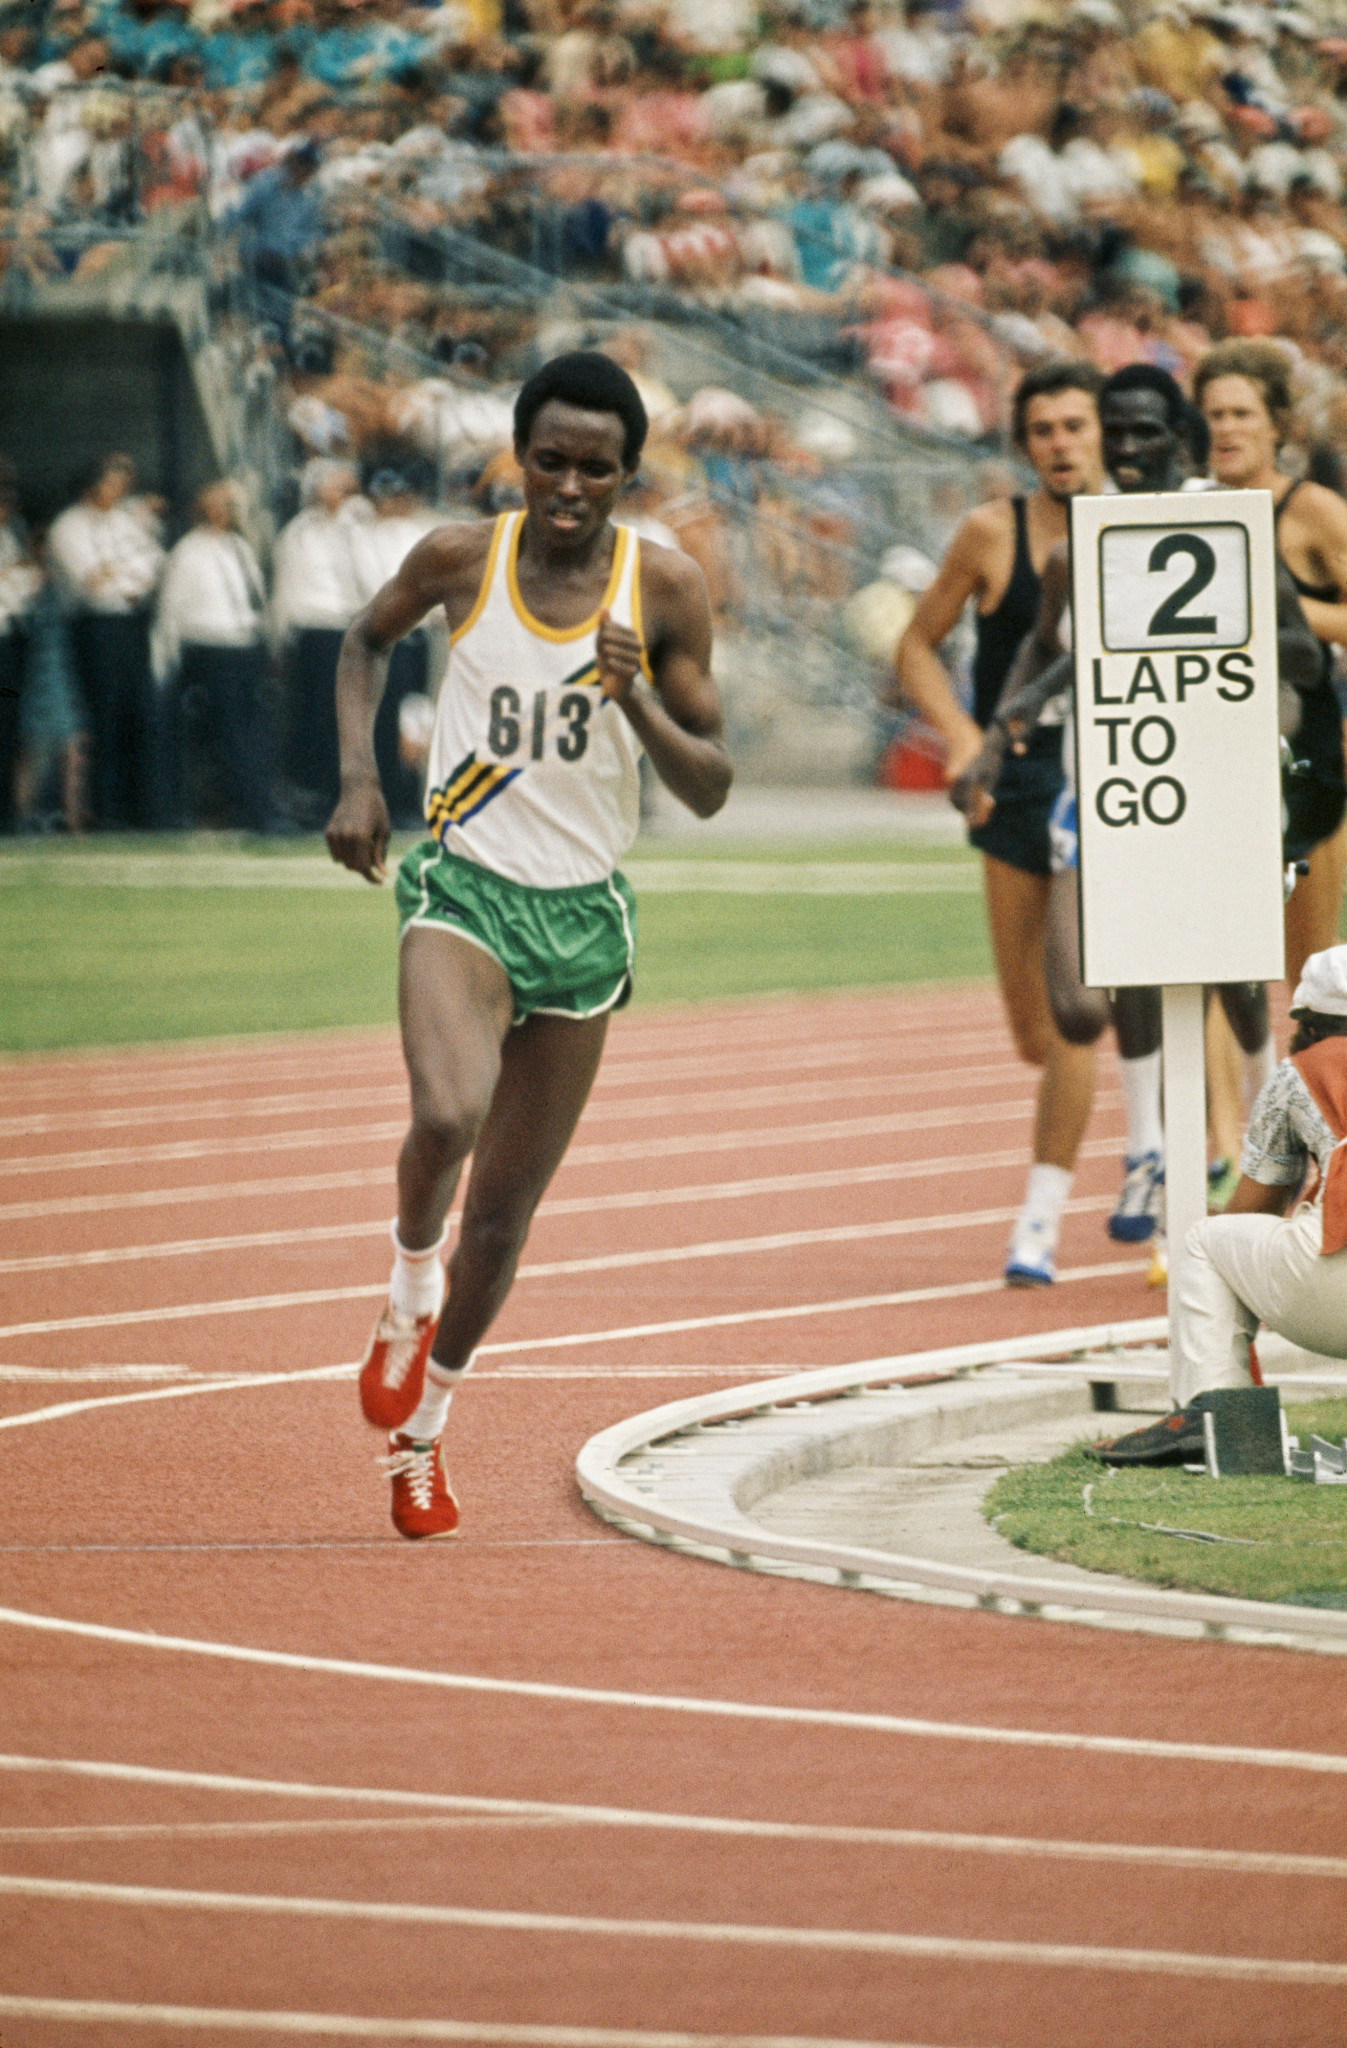 Tanzania's last Olympic medals came at Moscow 1980, when they won two silvers in athletics, including courtesy of Filbert Bayi in the men's 3,000 metres steeplechase ©Getty Images